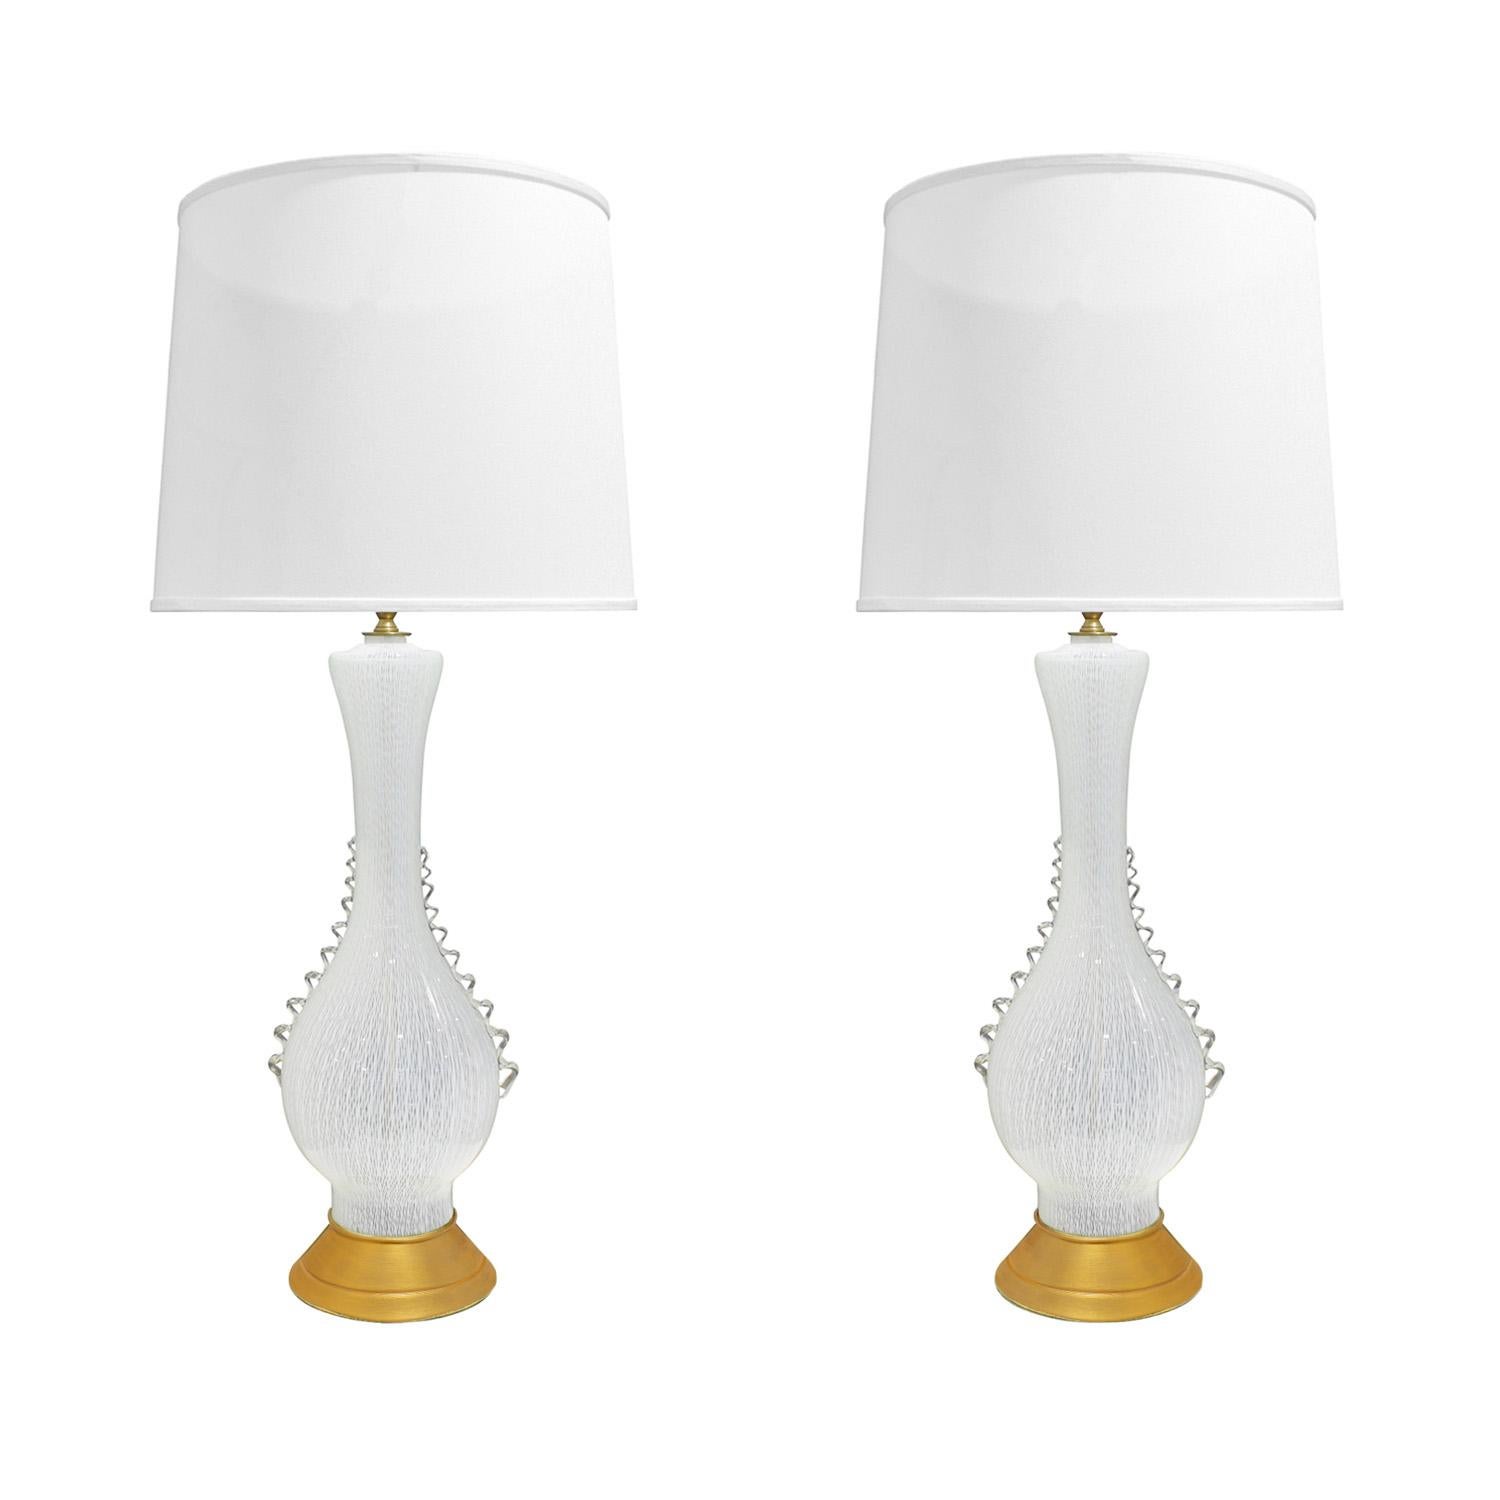 Pair of exquisite hand-blown latticino table lamps with gilded metal bases by Aureliano Toso, Murano Italy, 1950's.  The artisanship of these lamps is off the charts. Simply stunning.